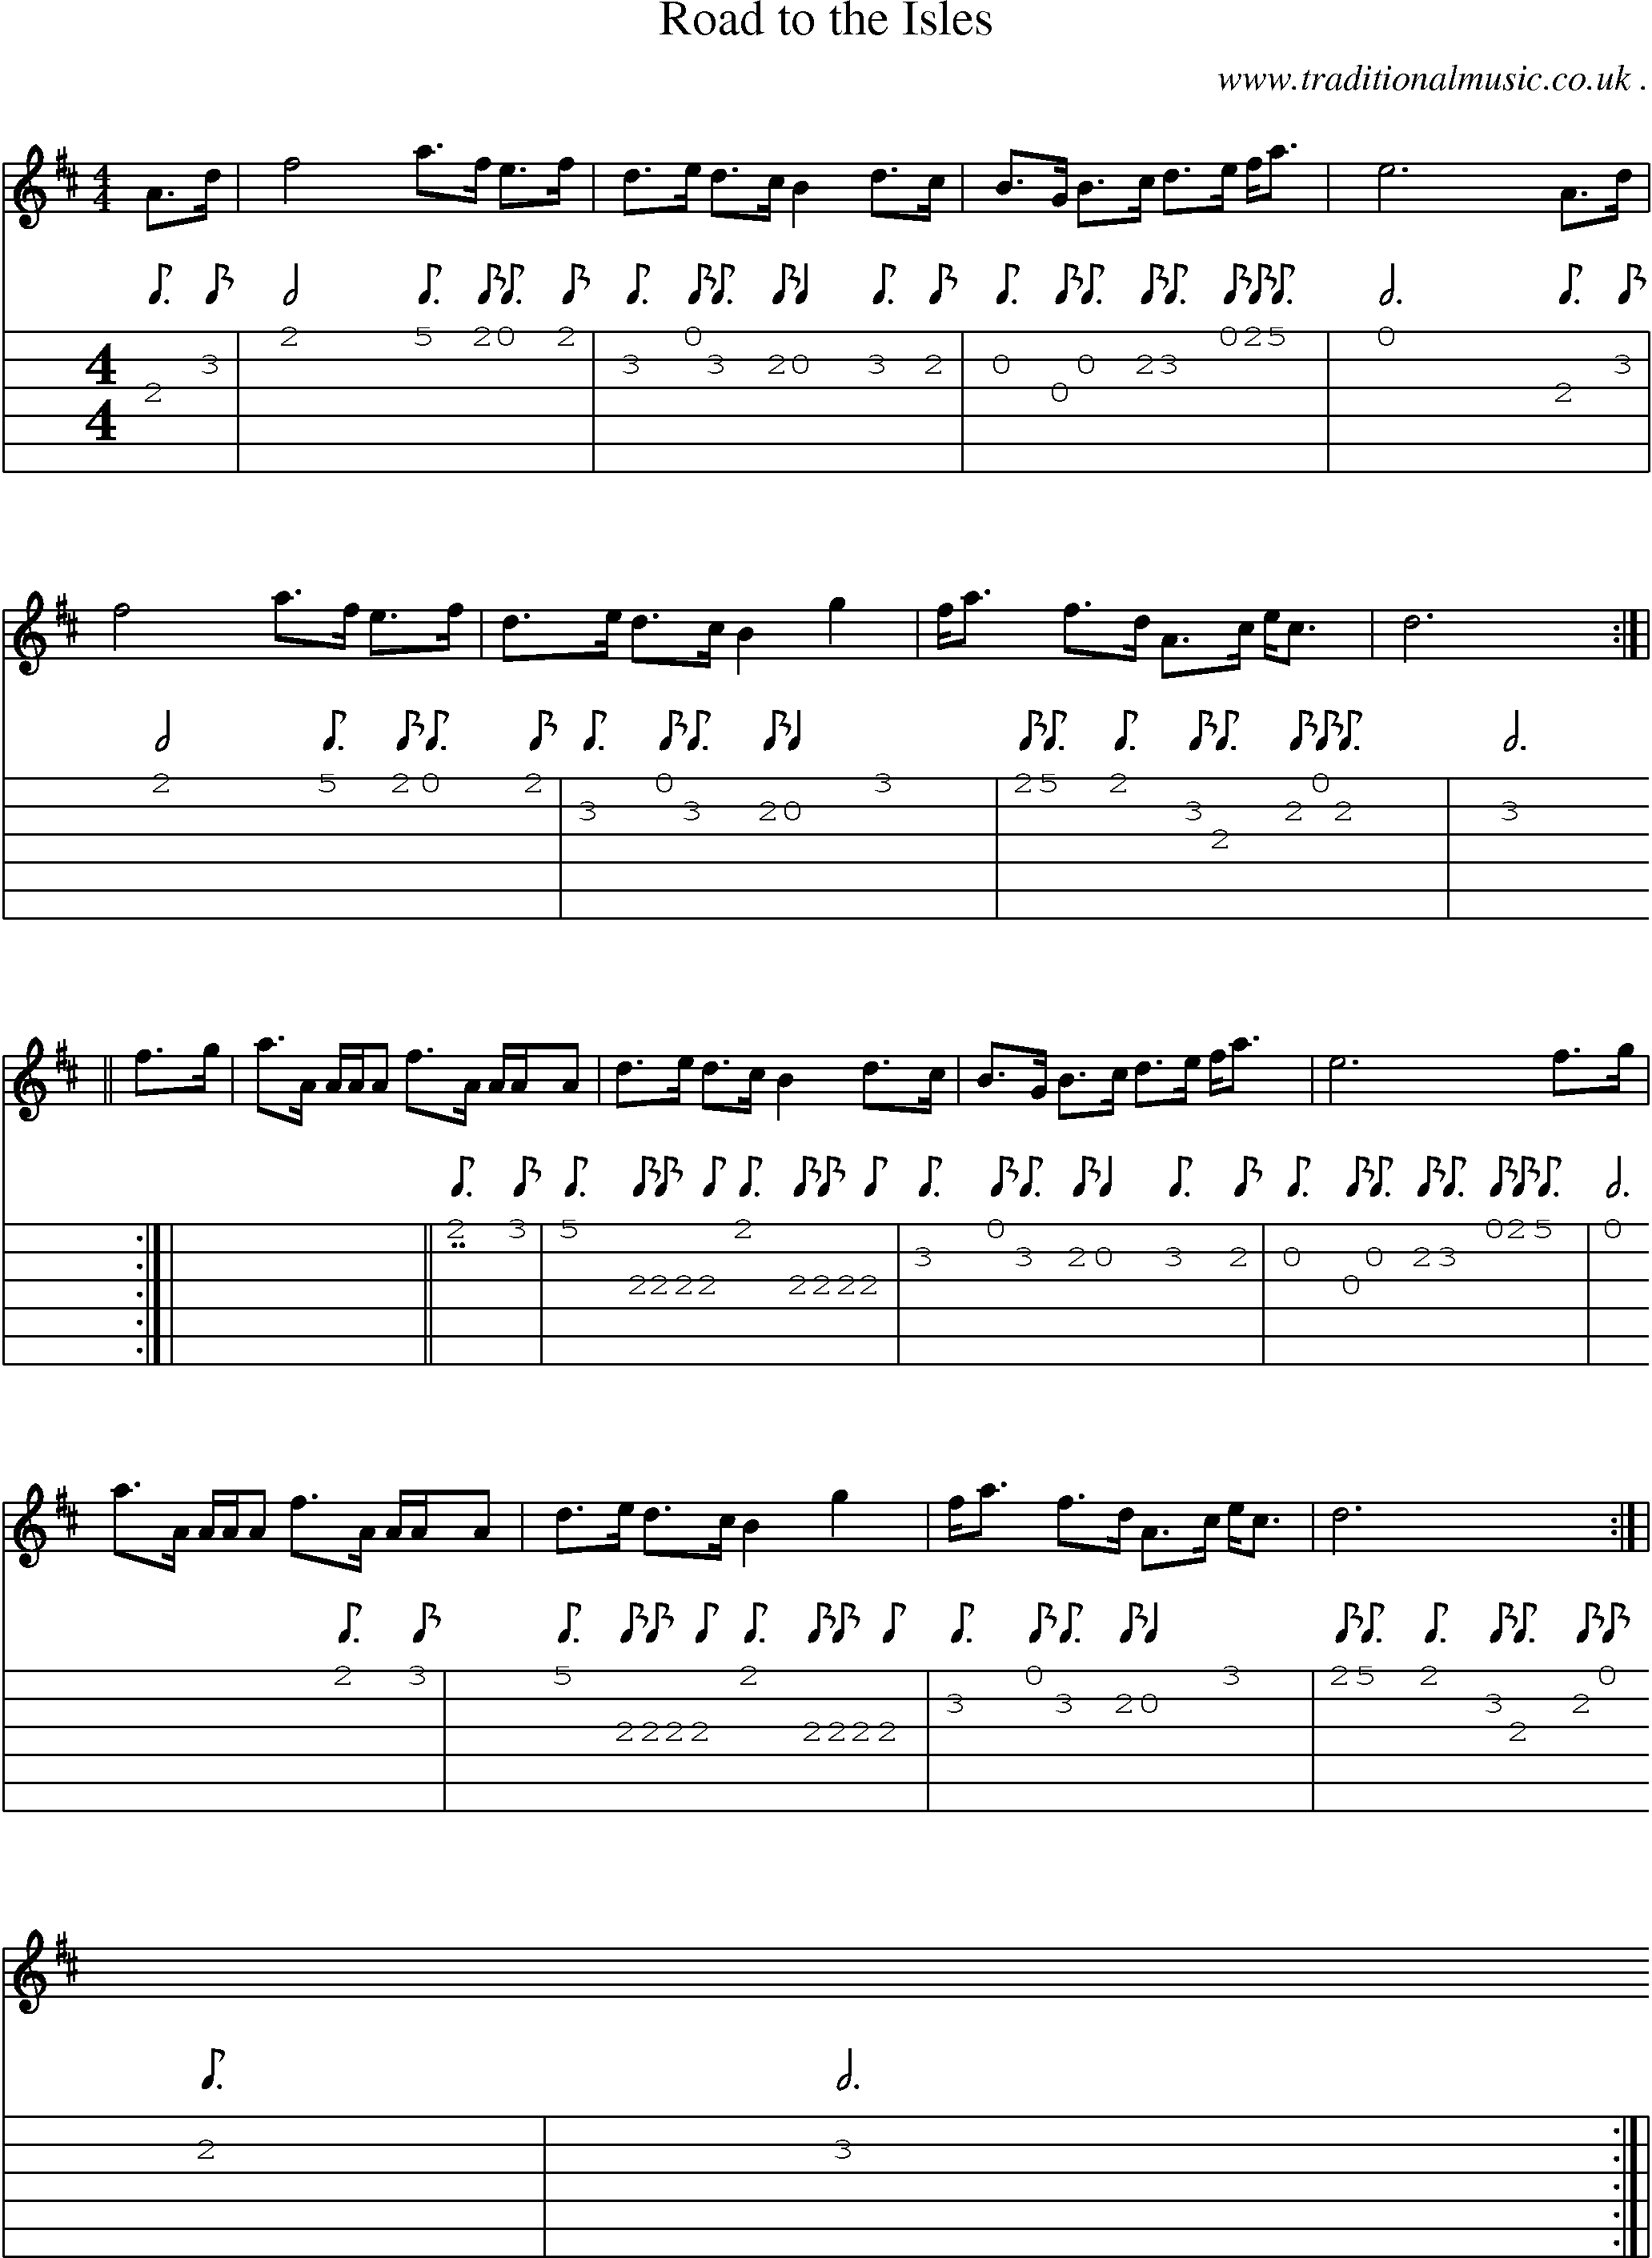 Sheet-music  score, Chords and Guitar Tabs for Road To The Isles